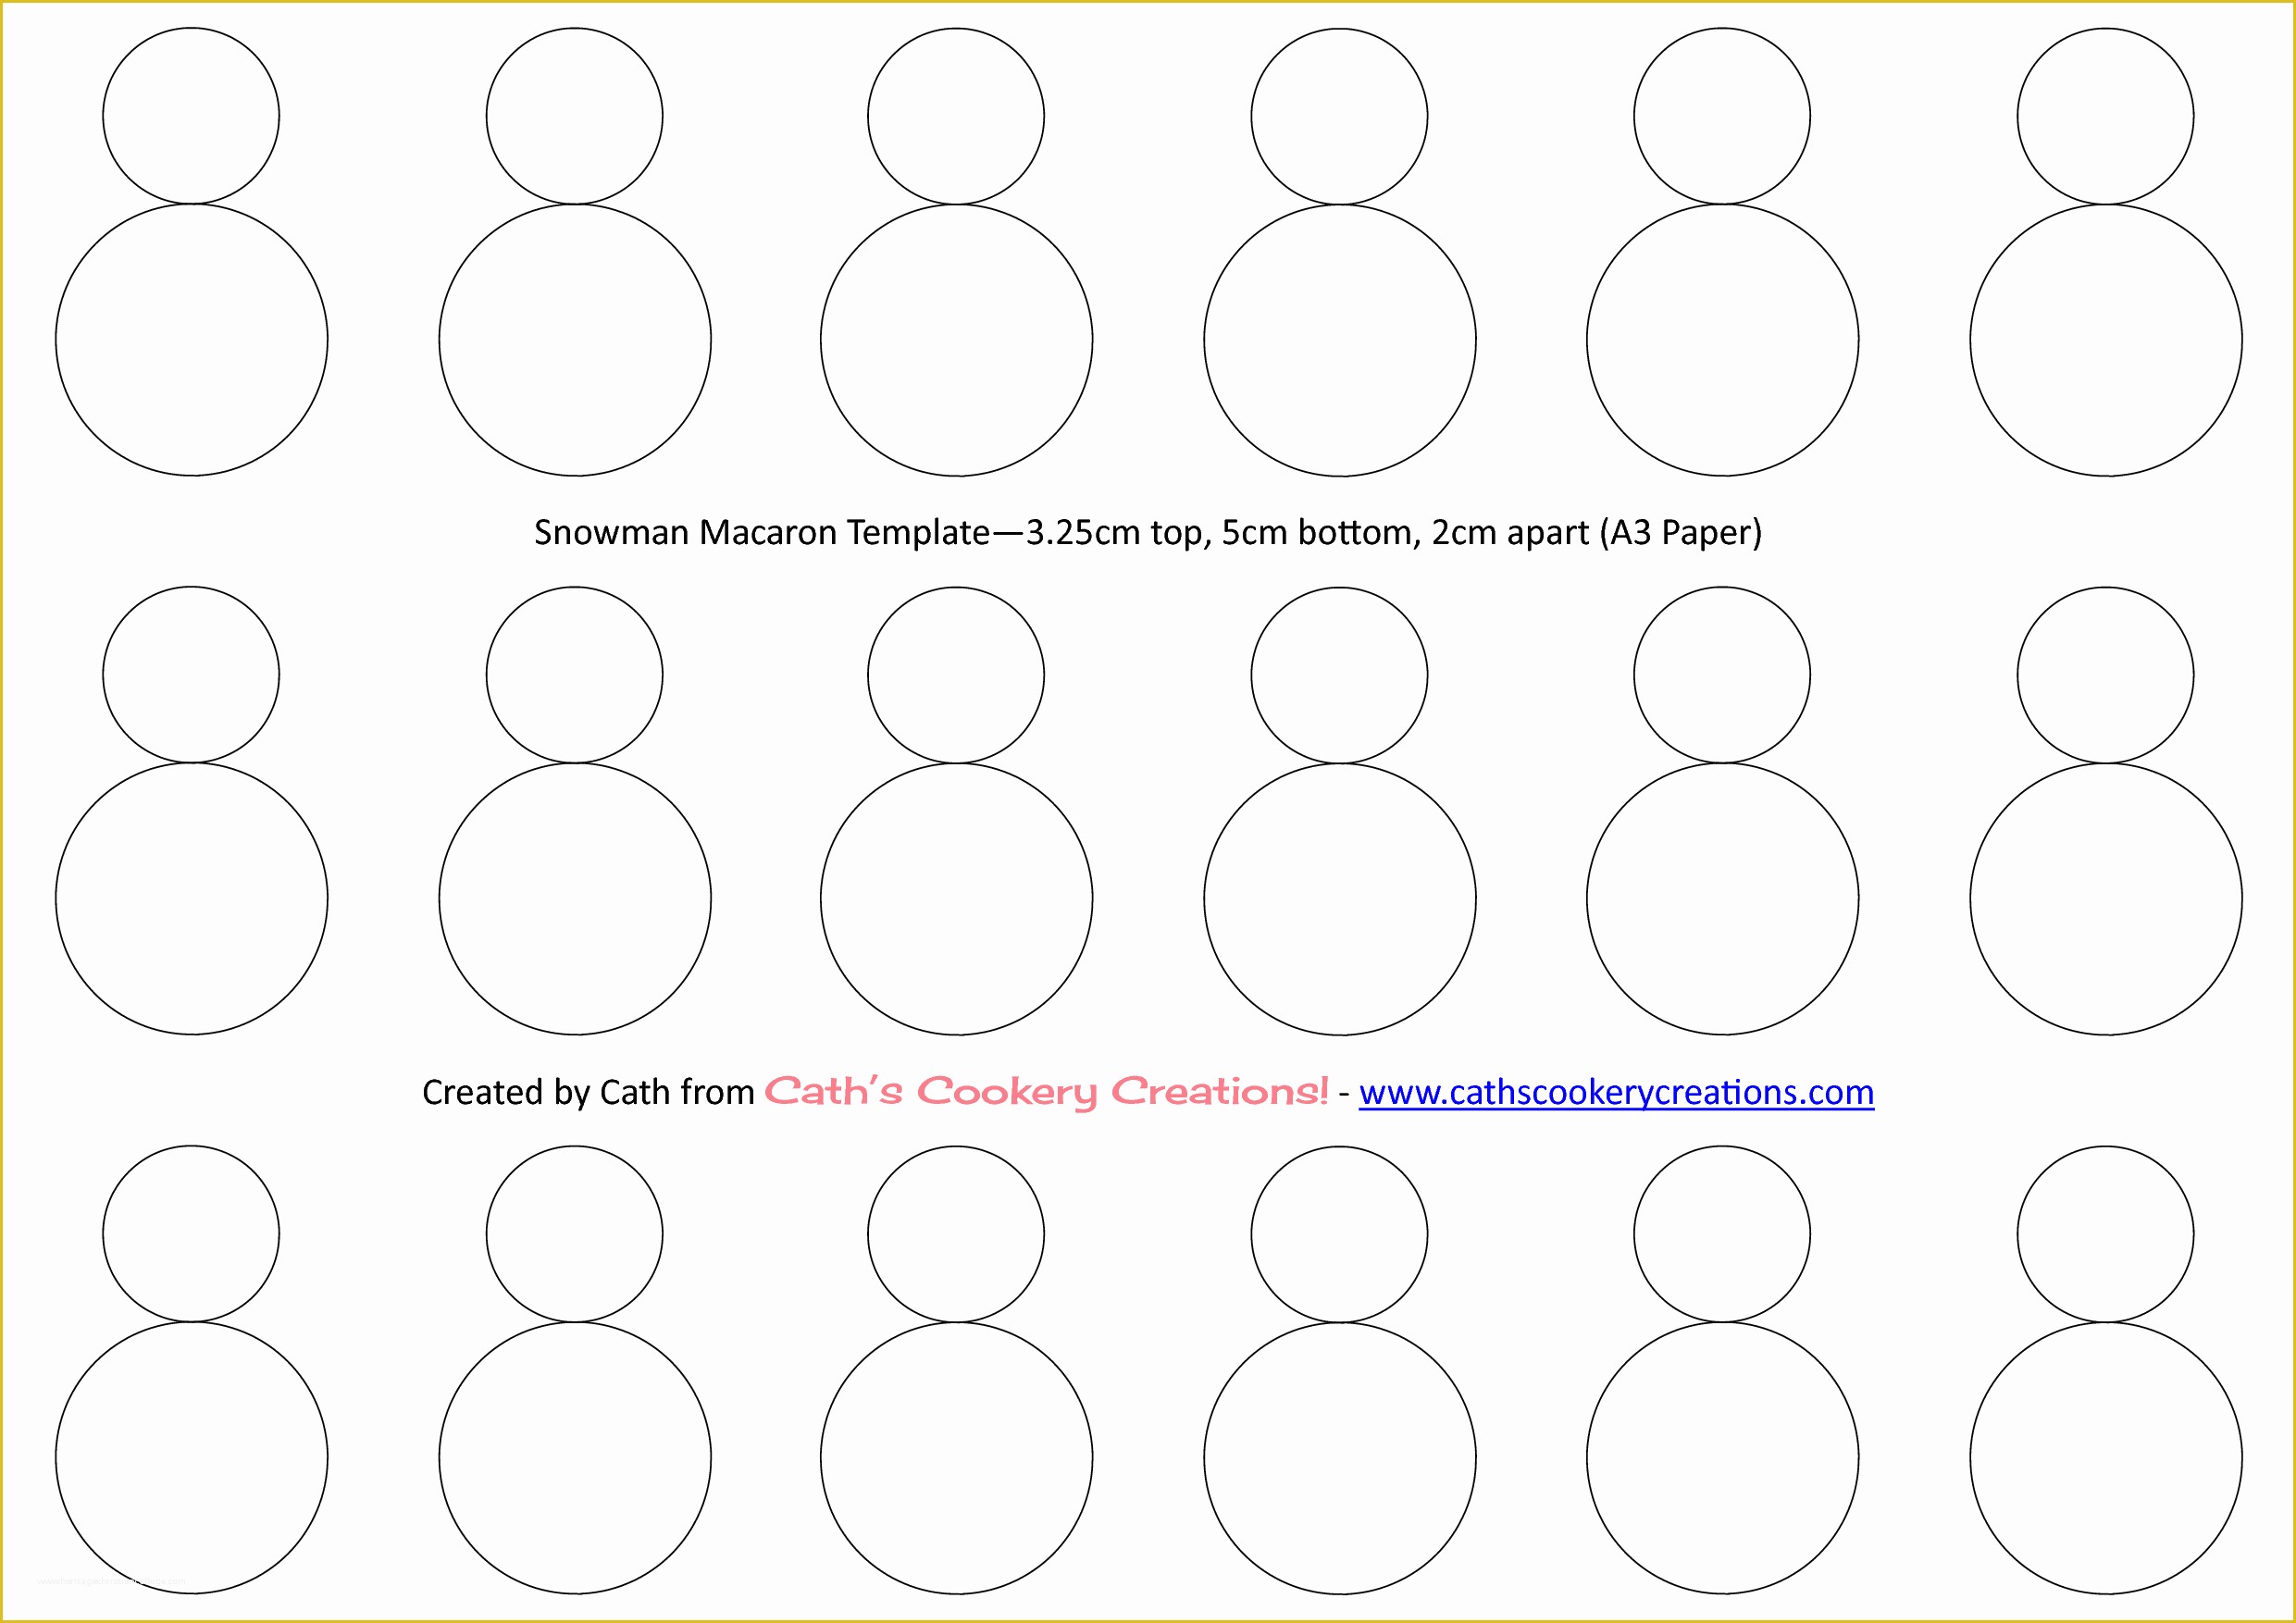 Free Macaron Template Of Snowman Template Macarons In 2019